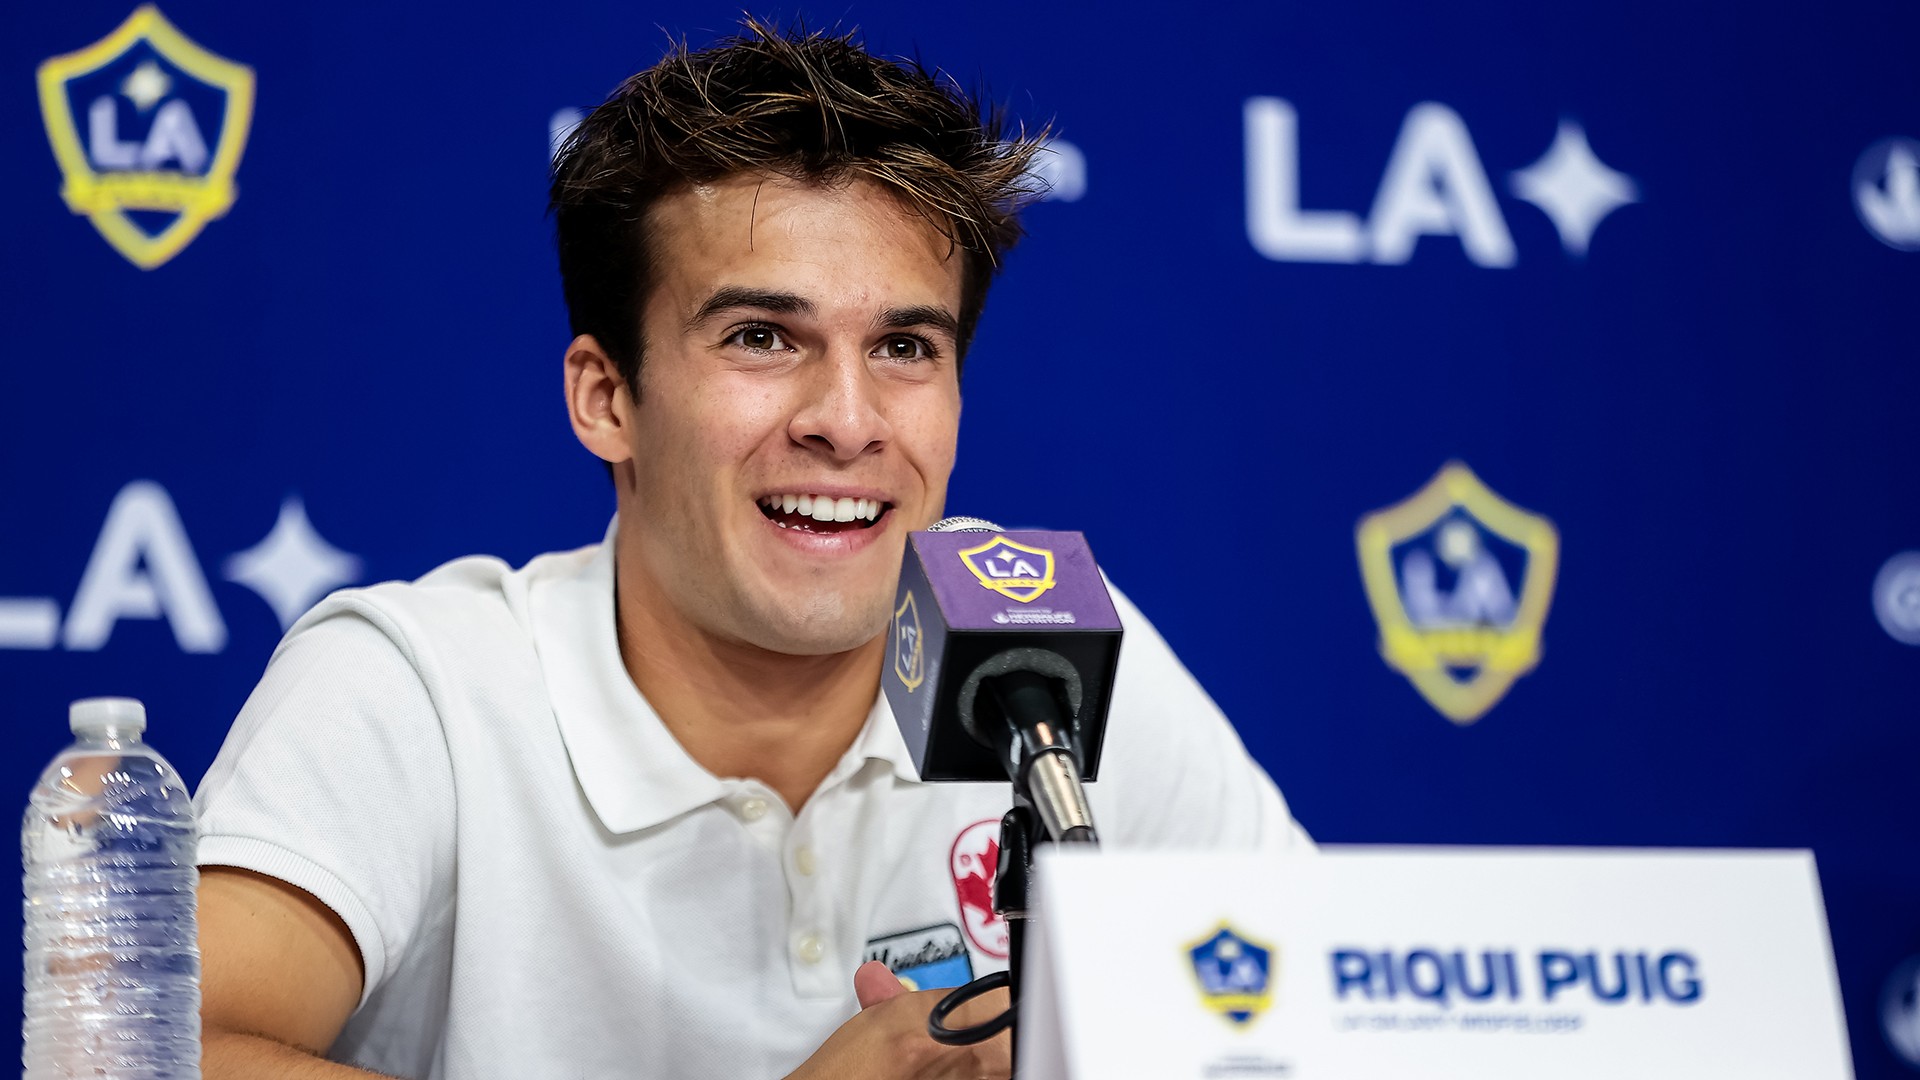 Riqui Puig, from Barcelona to LA Galaxy: “This is a league for young players”